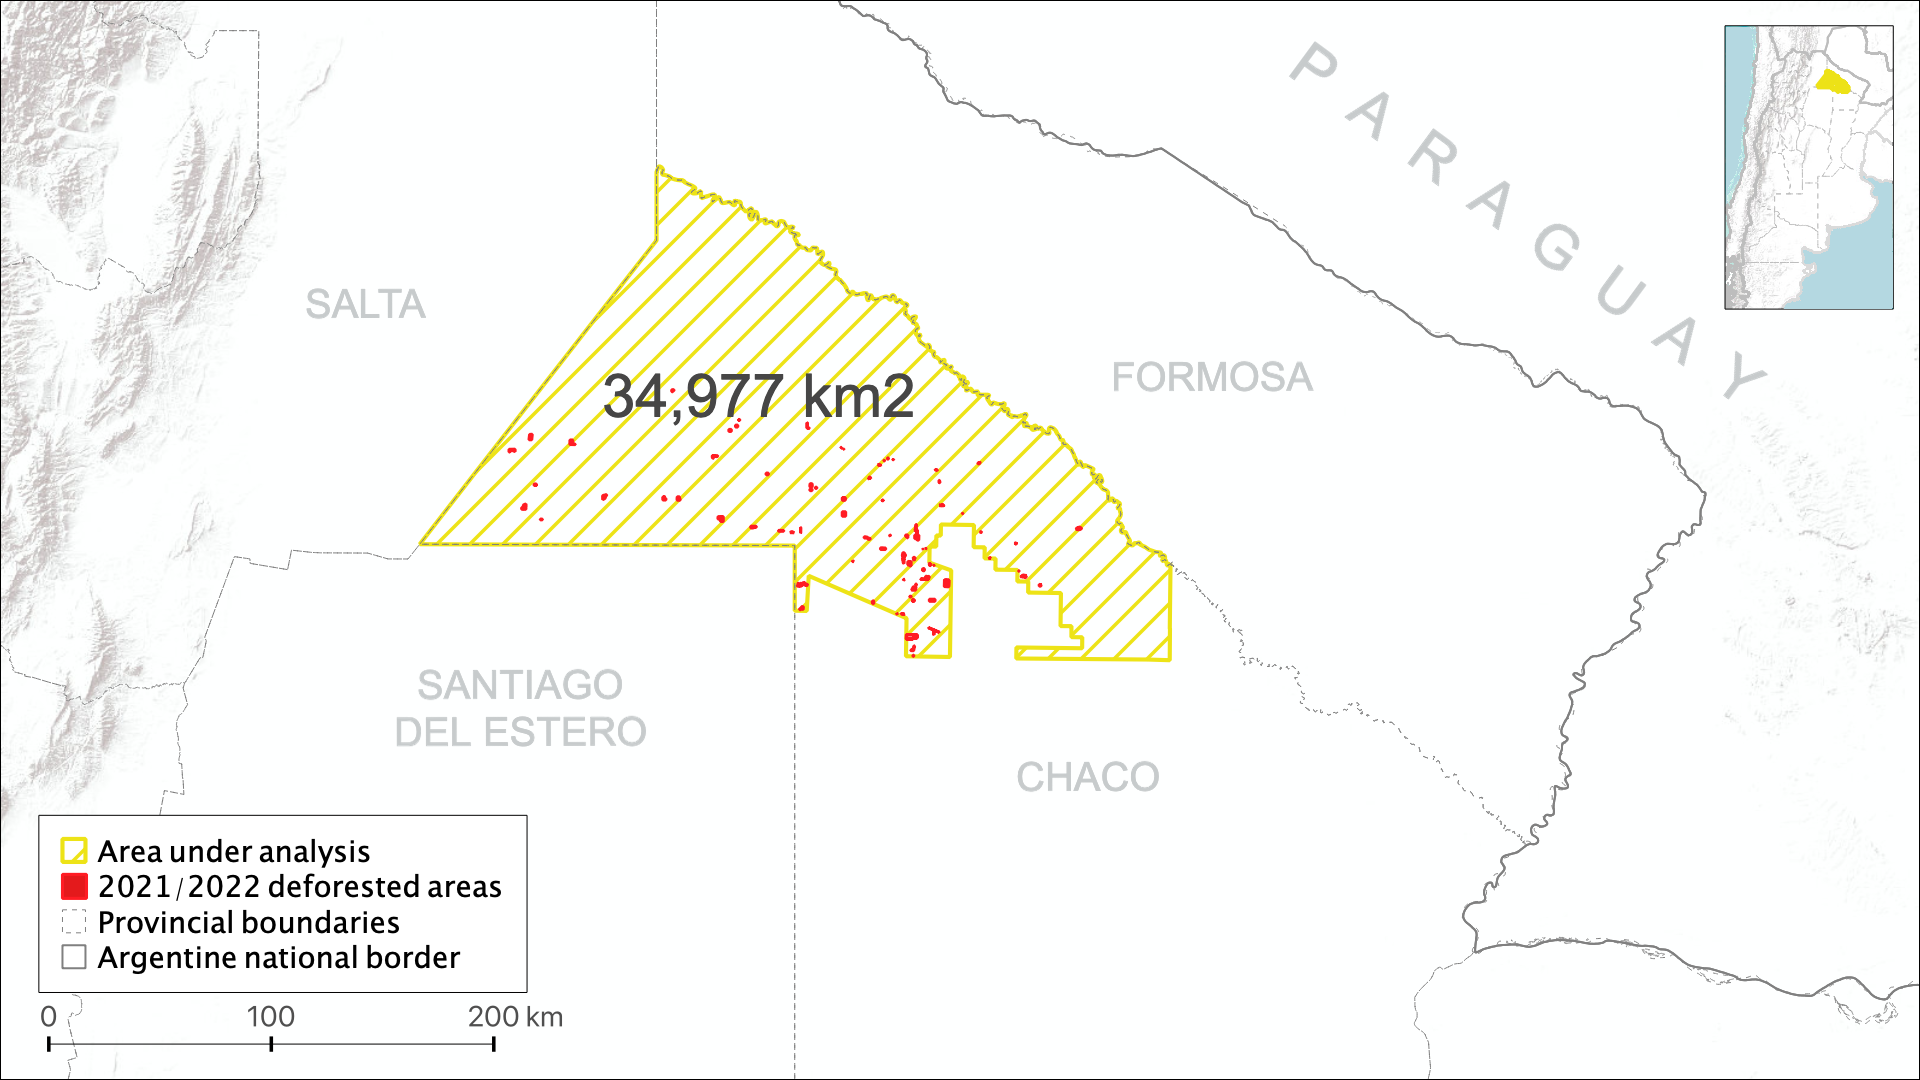 Map of northern Argentina showing the selected area for the analysis.